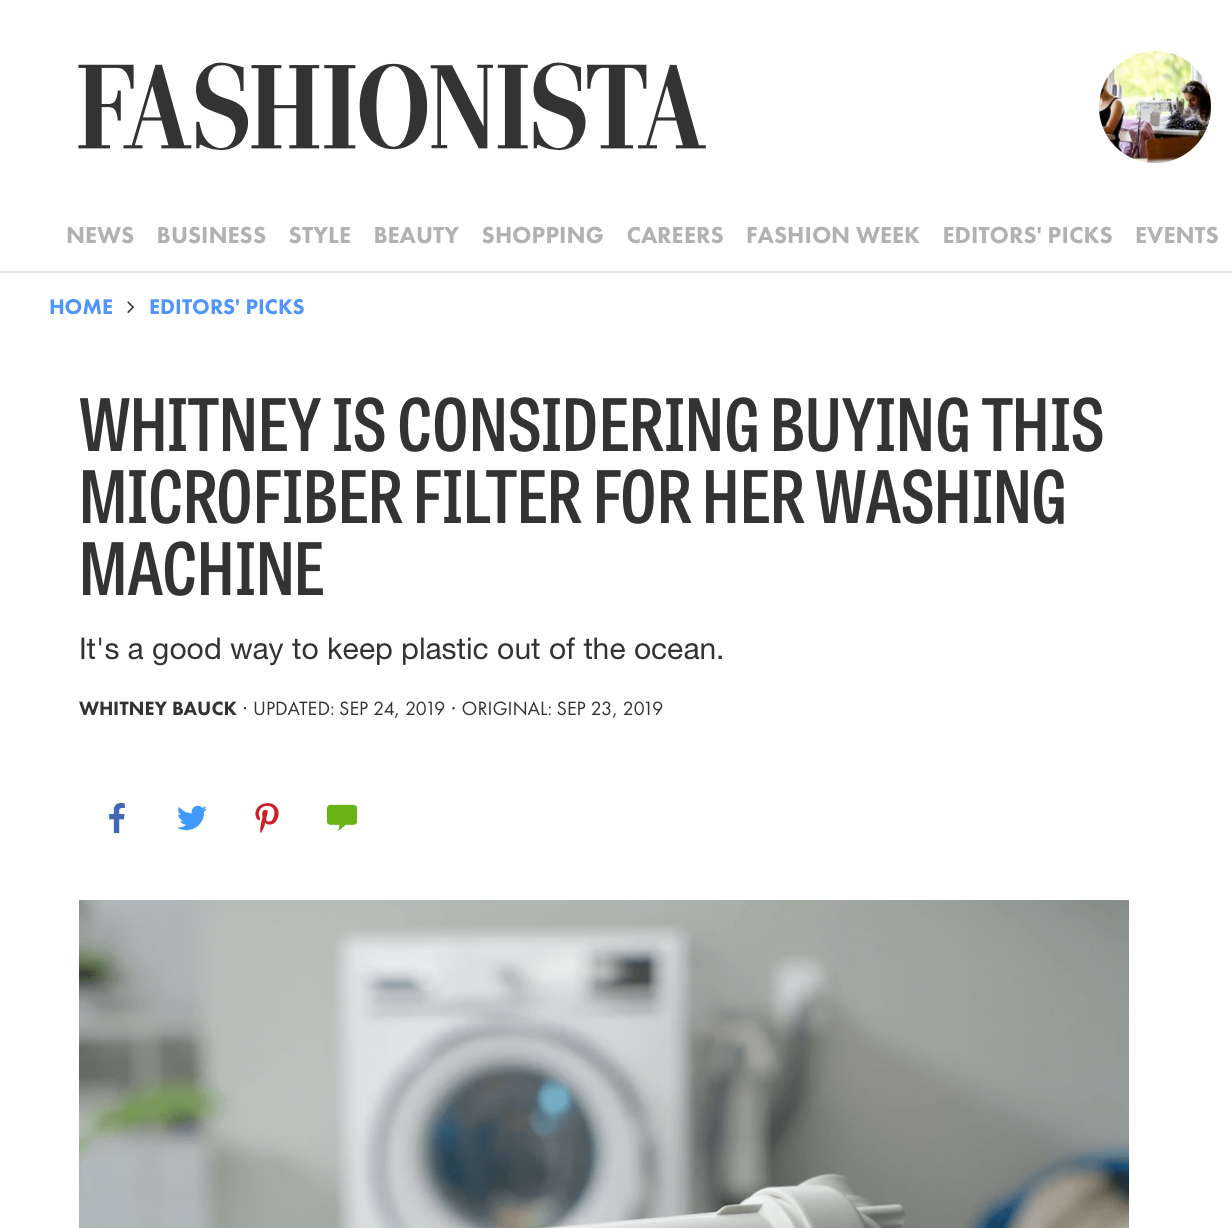 Whitney is considering buying this microfiber filter for her washing machine